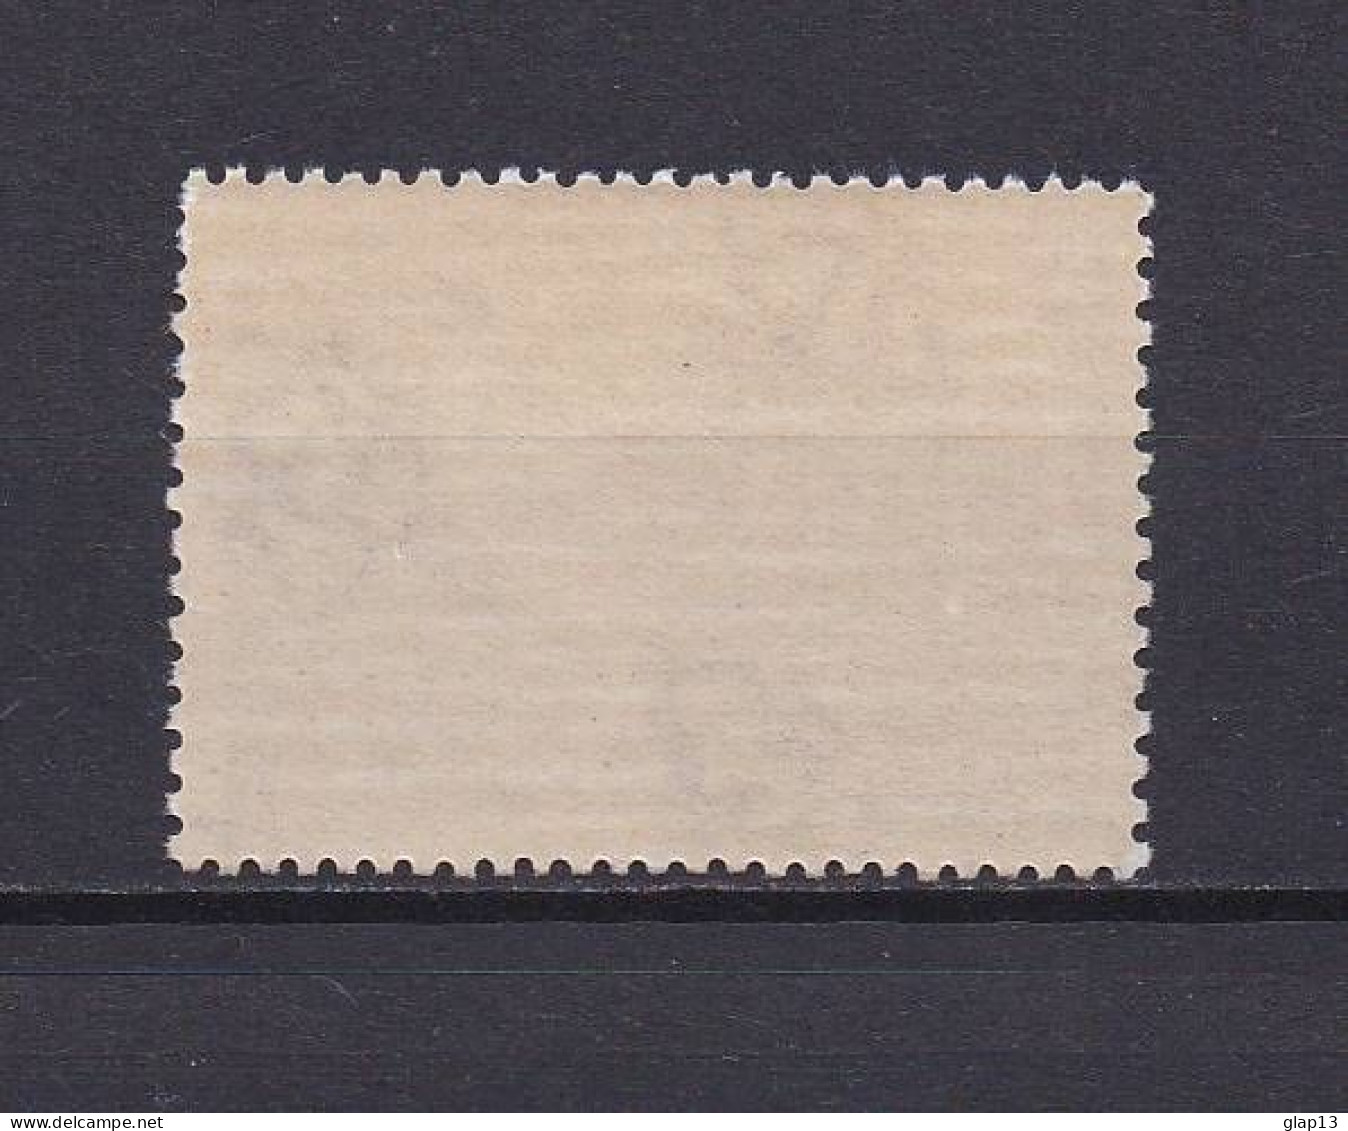 GRECE 1960 TIMBRE N°724 NEUF** EUROPA - Unused Stamps